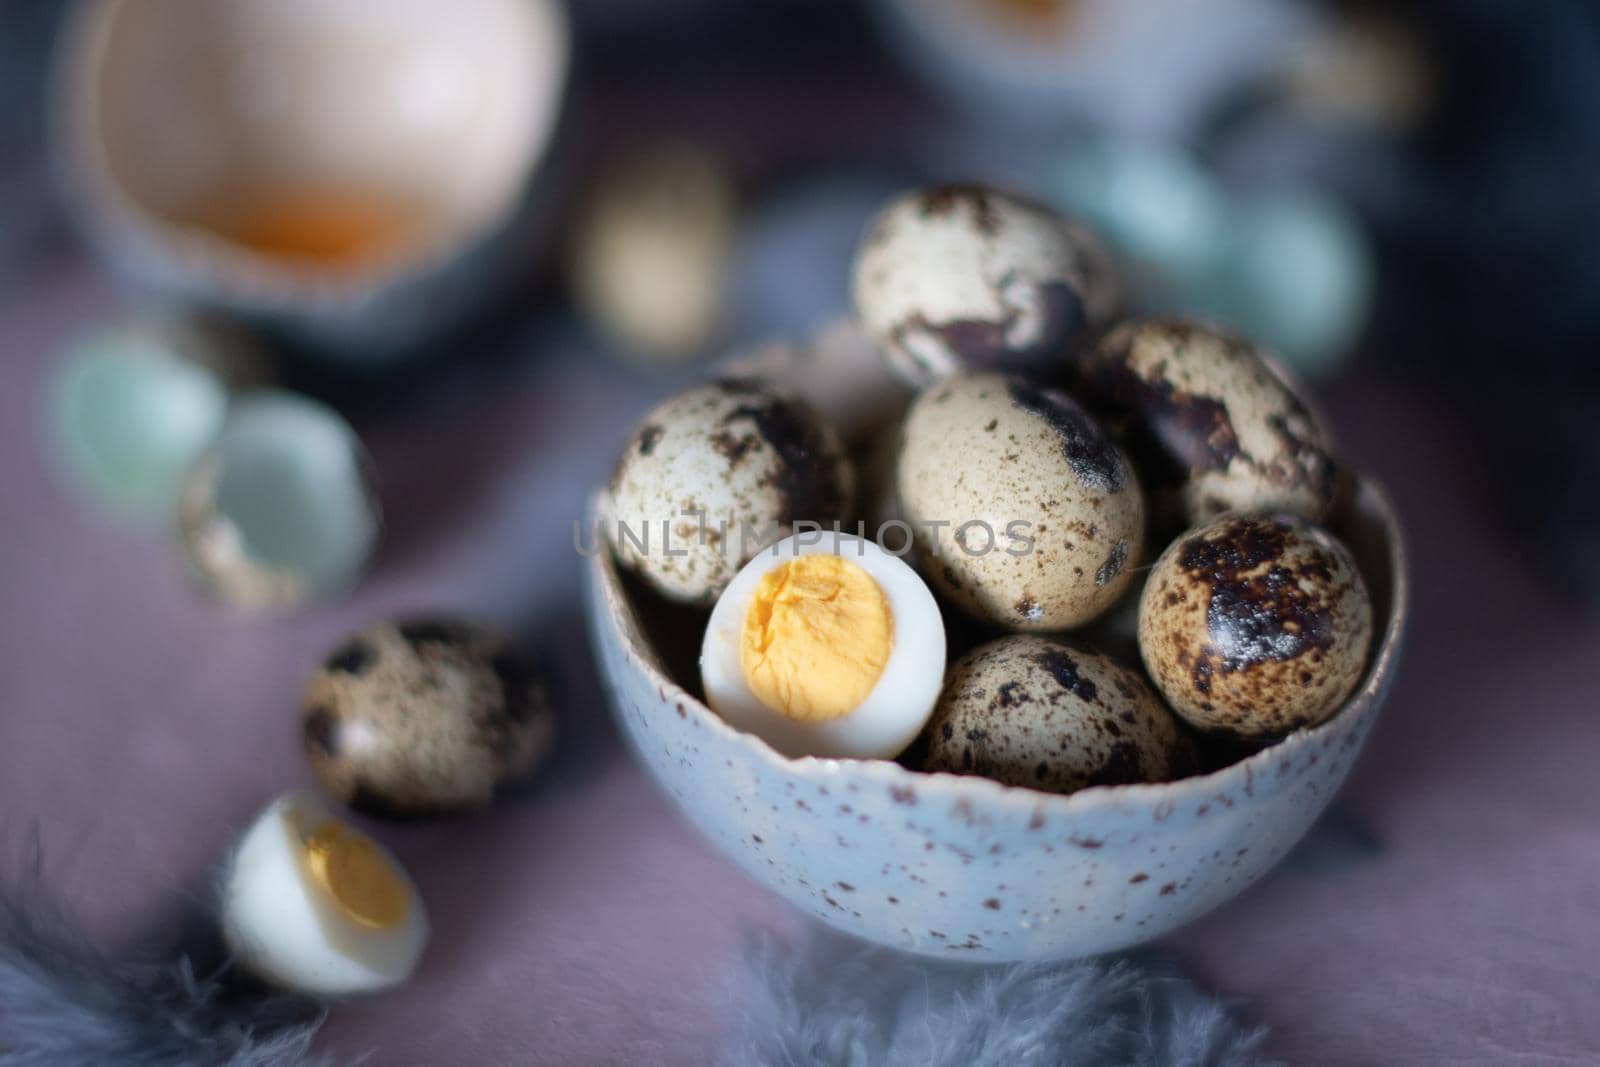 quail eggs in ceramic vases, gray feathers on the table, easter still life, natural food, diet and antioxidants, dark key and shallow depth of field. High quality photo